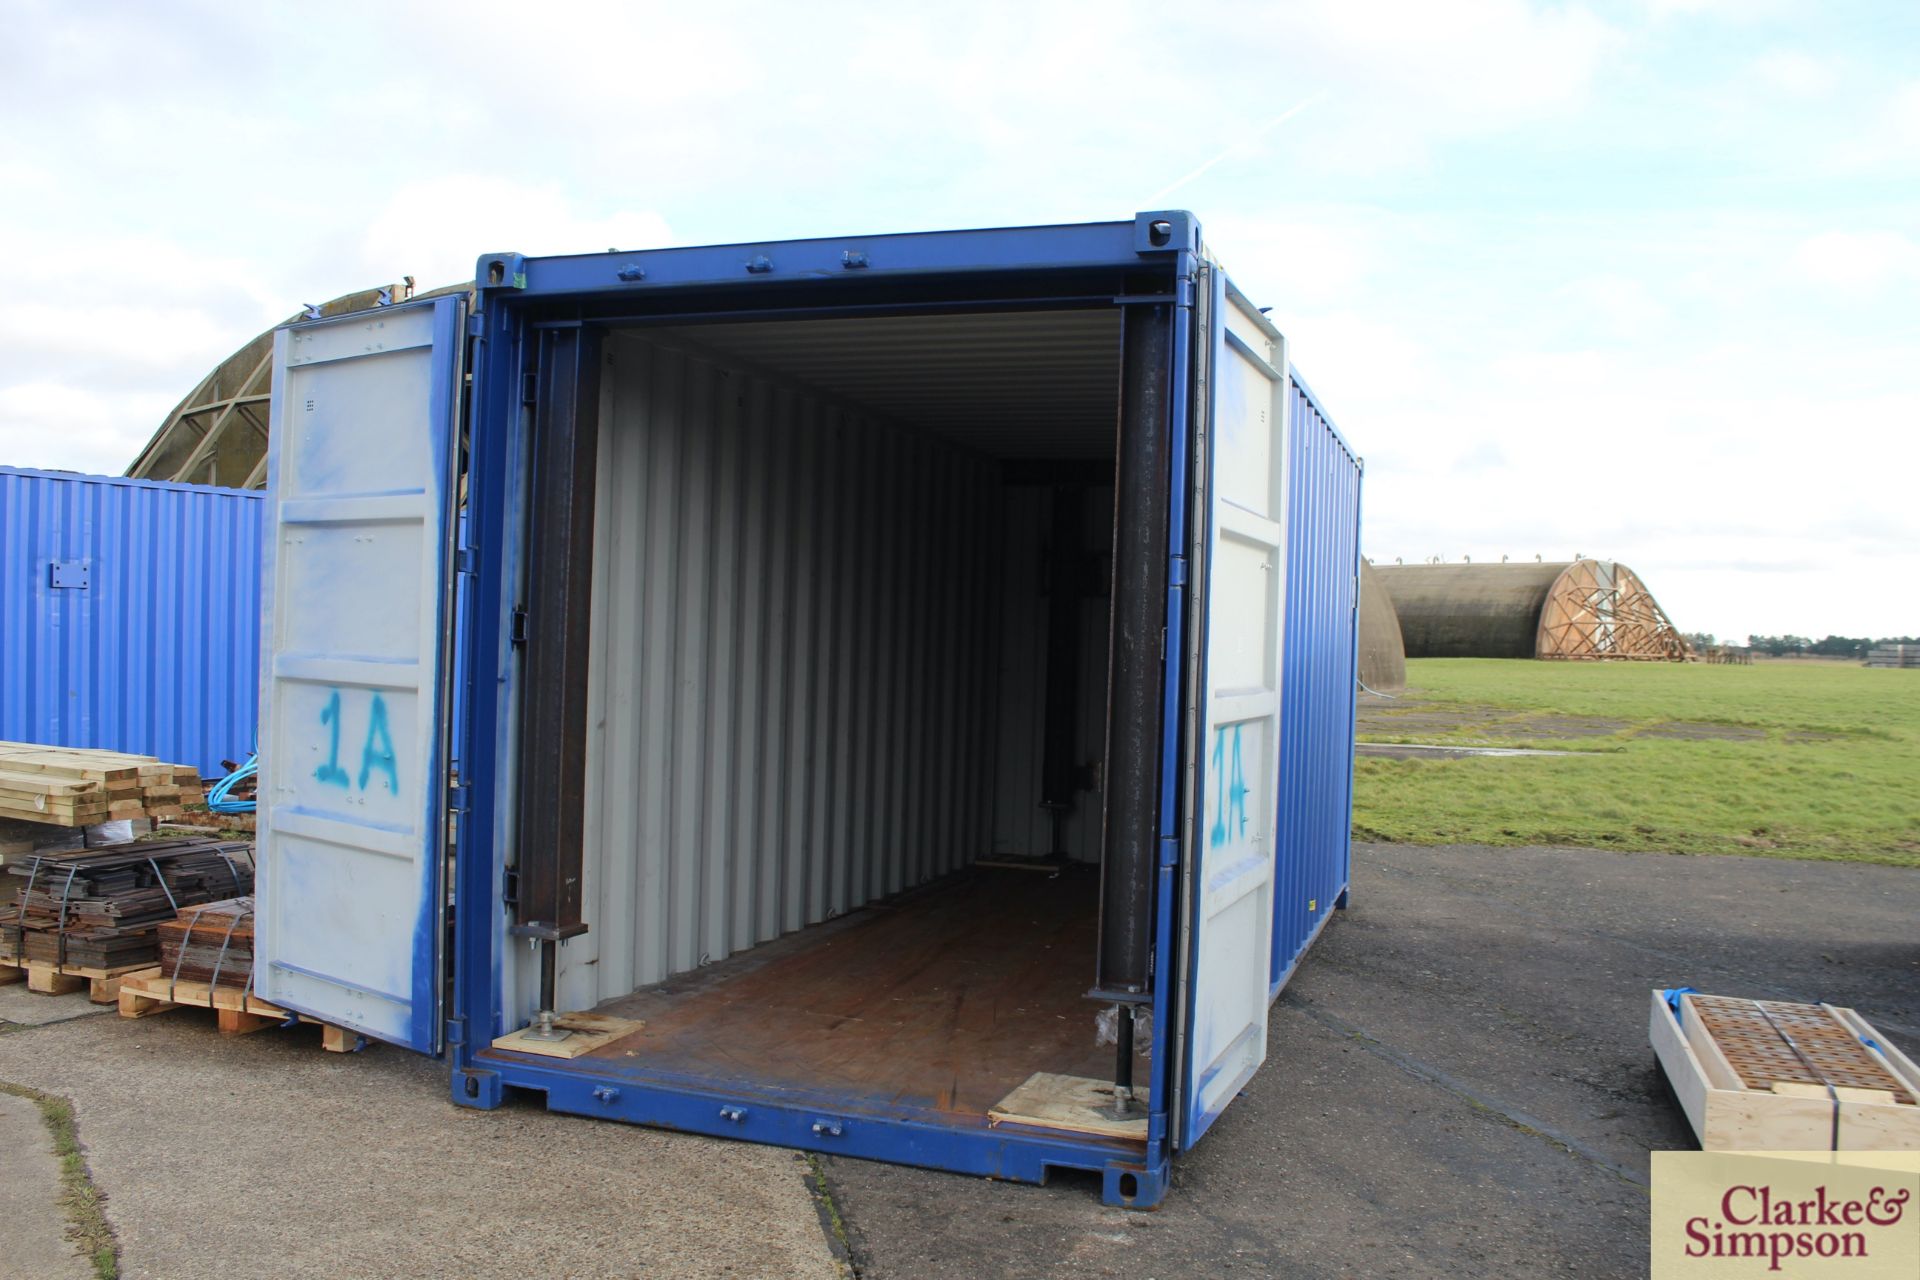 20ft x 9ft6in high shipping container. 2019. Partially reinforced to interior to include plates - Image 9 of 19